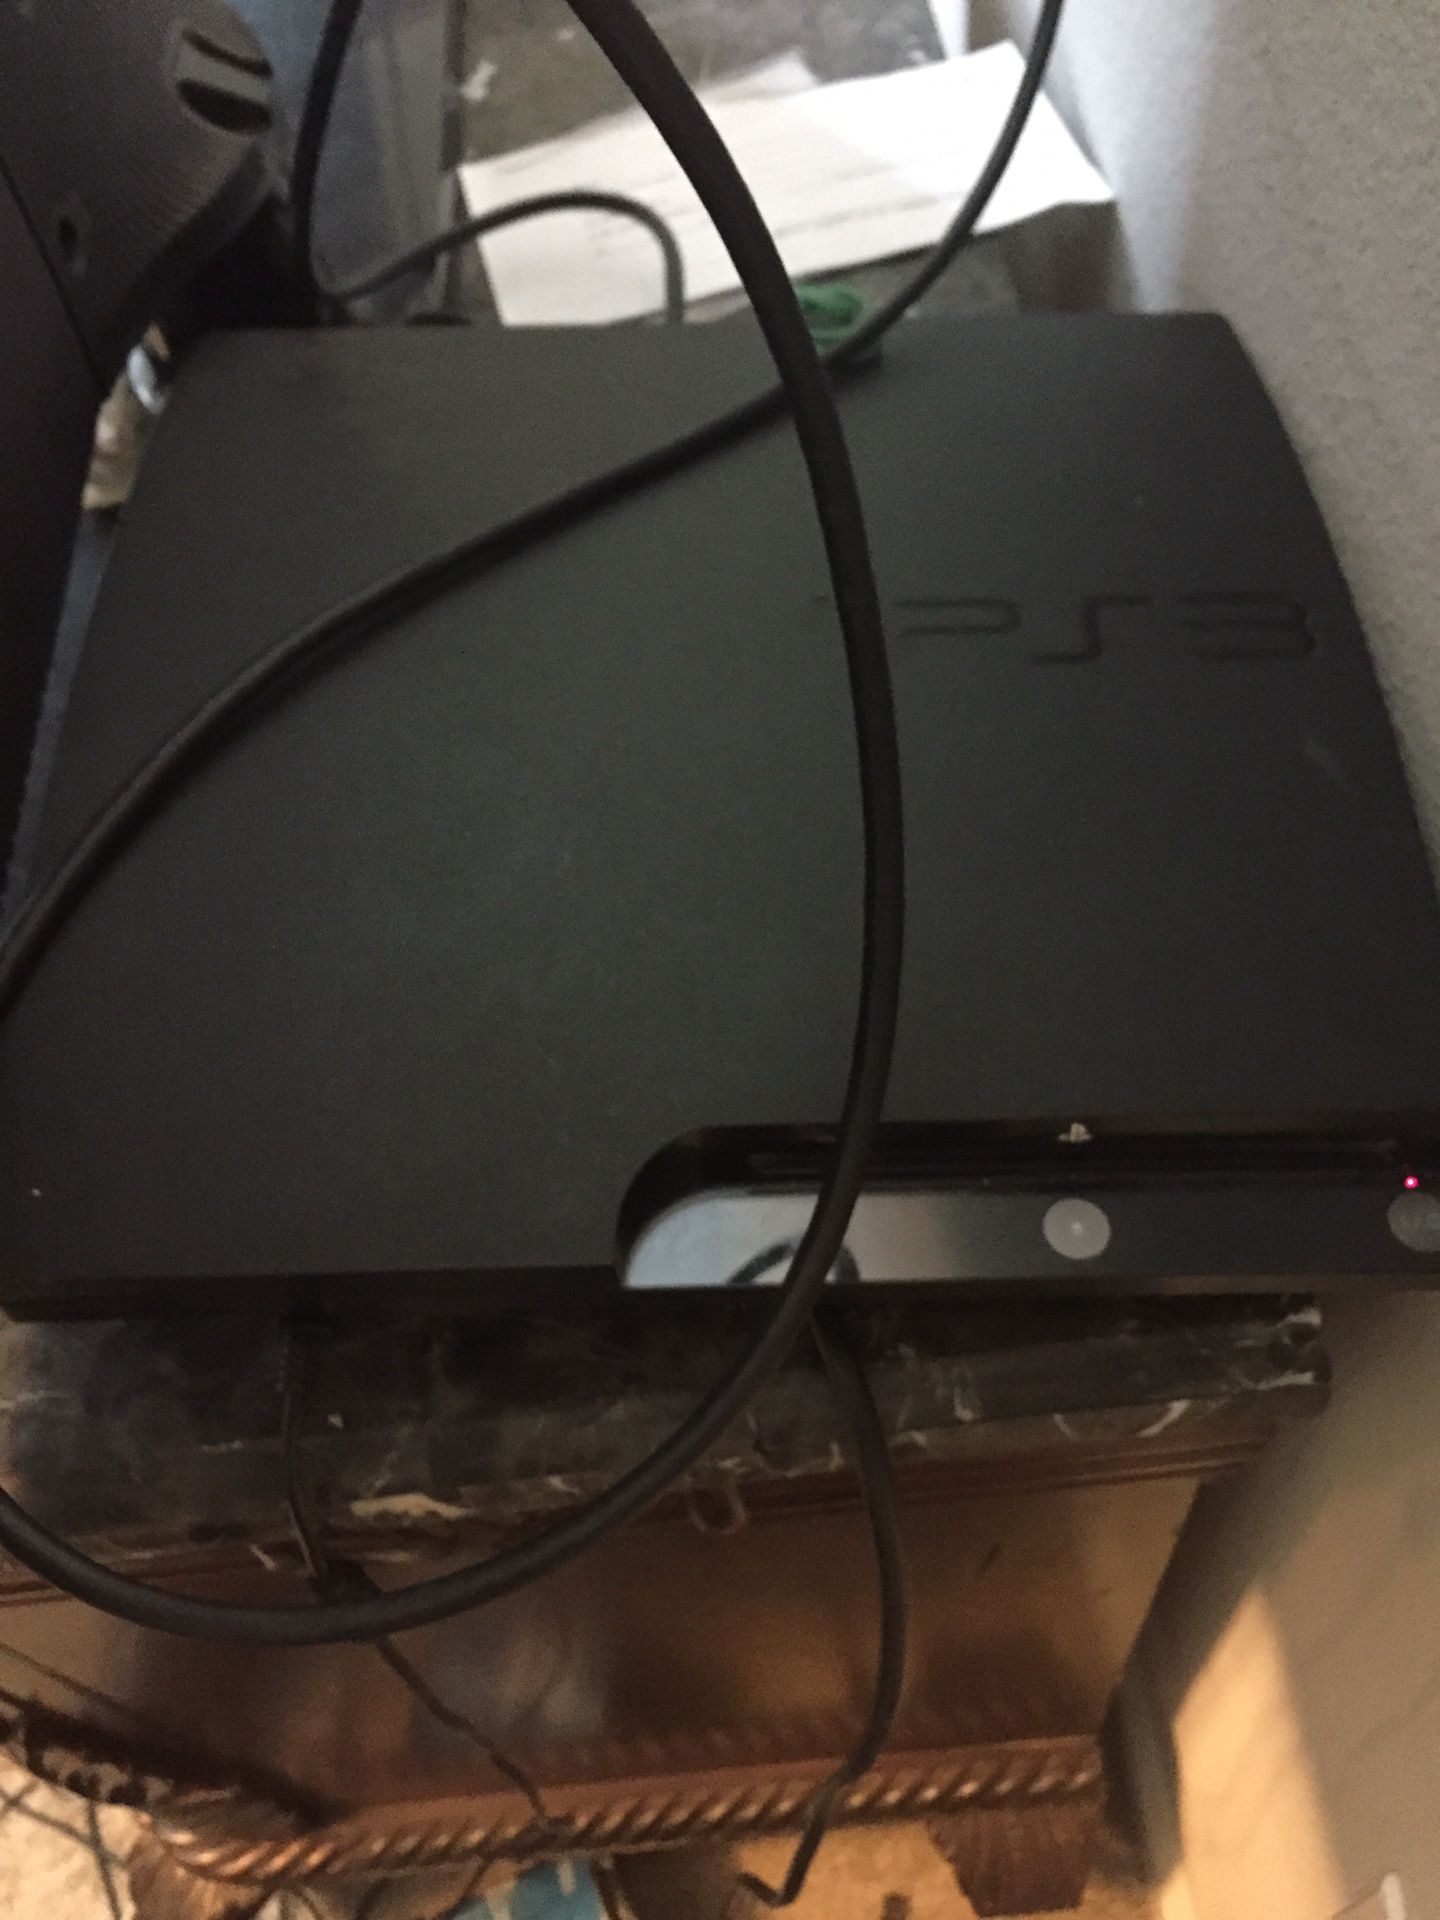 PS3 with over 20+ games and 2 controllers